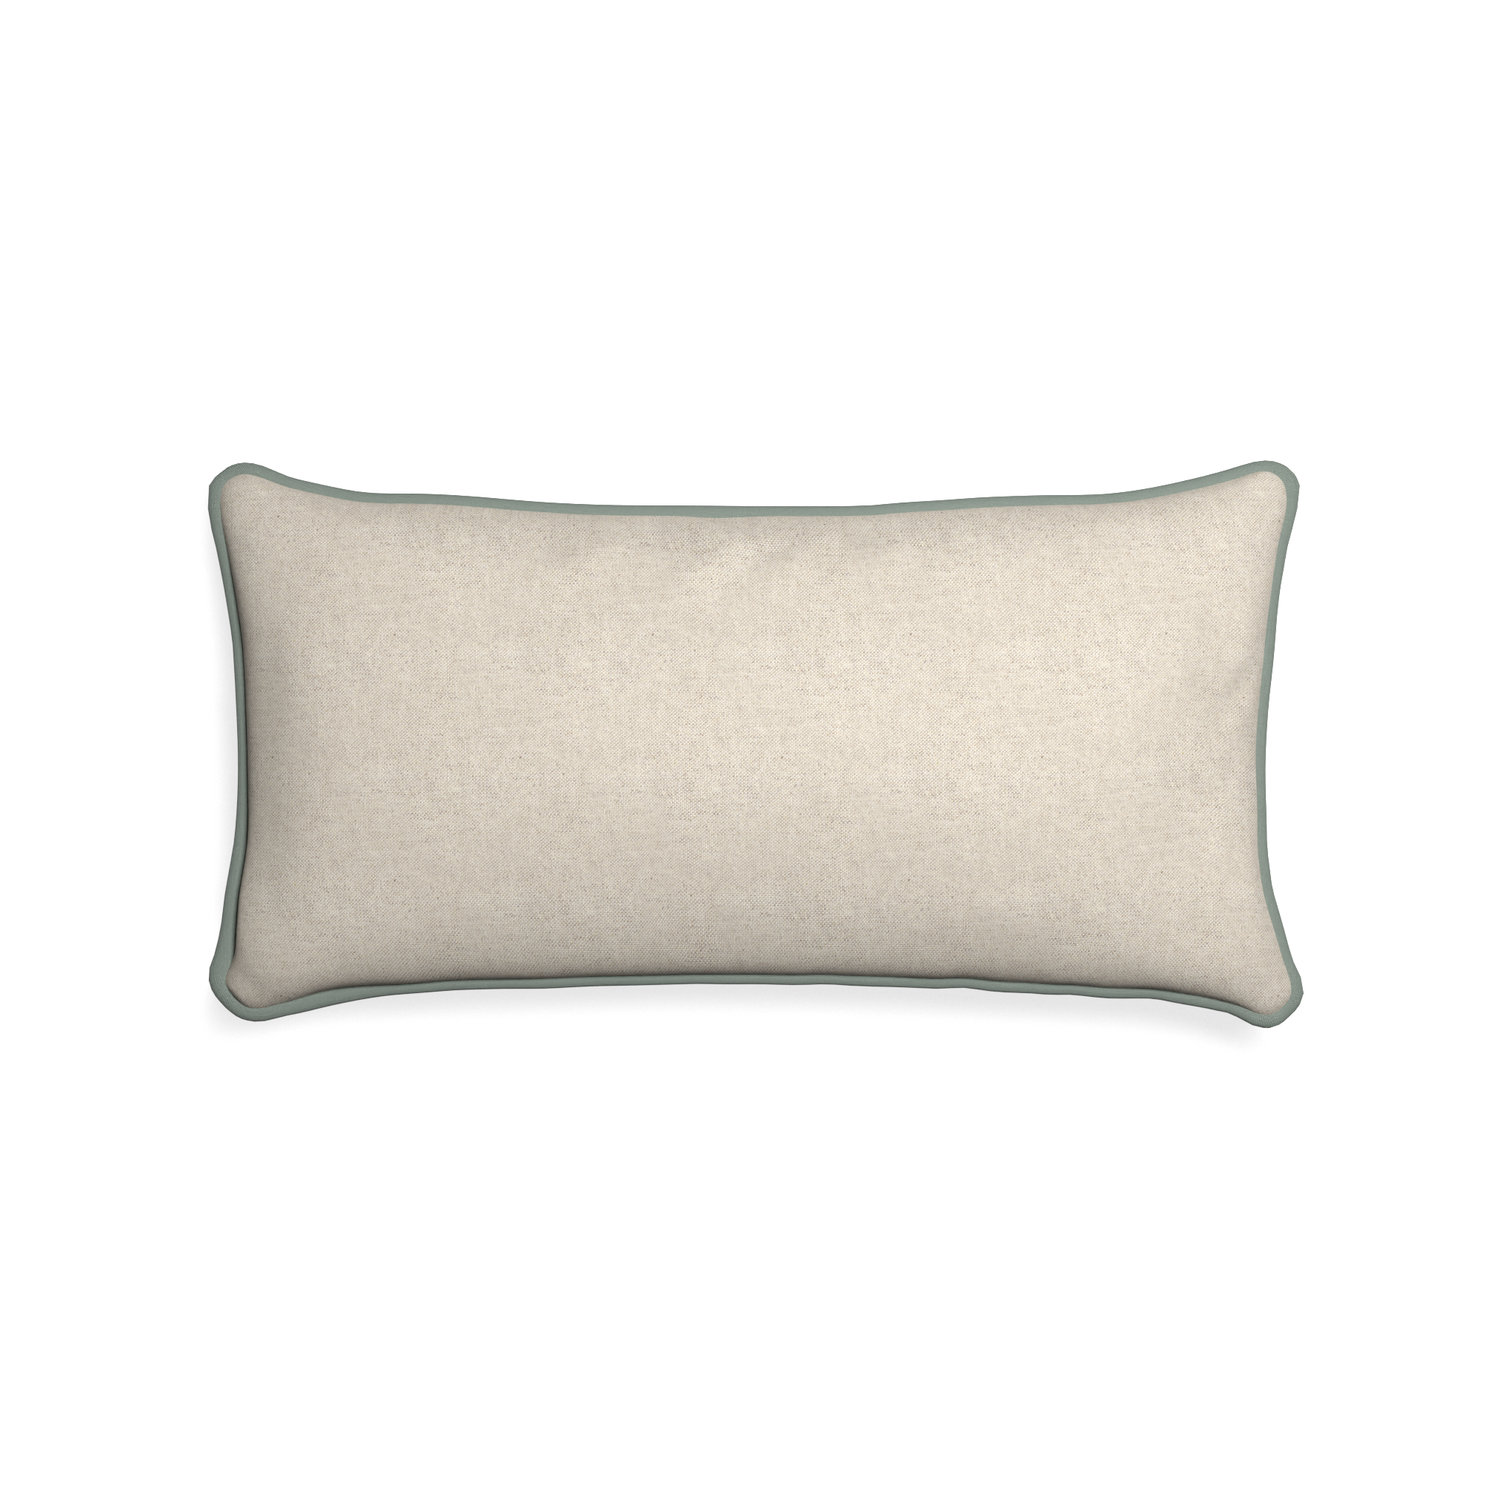 Midi-lumbar oat custom light brownpillow with sage piping on white background